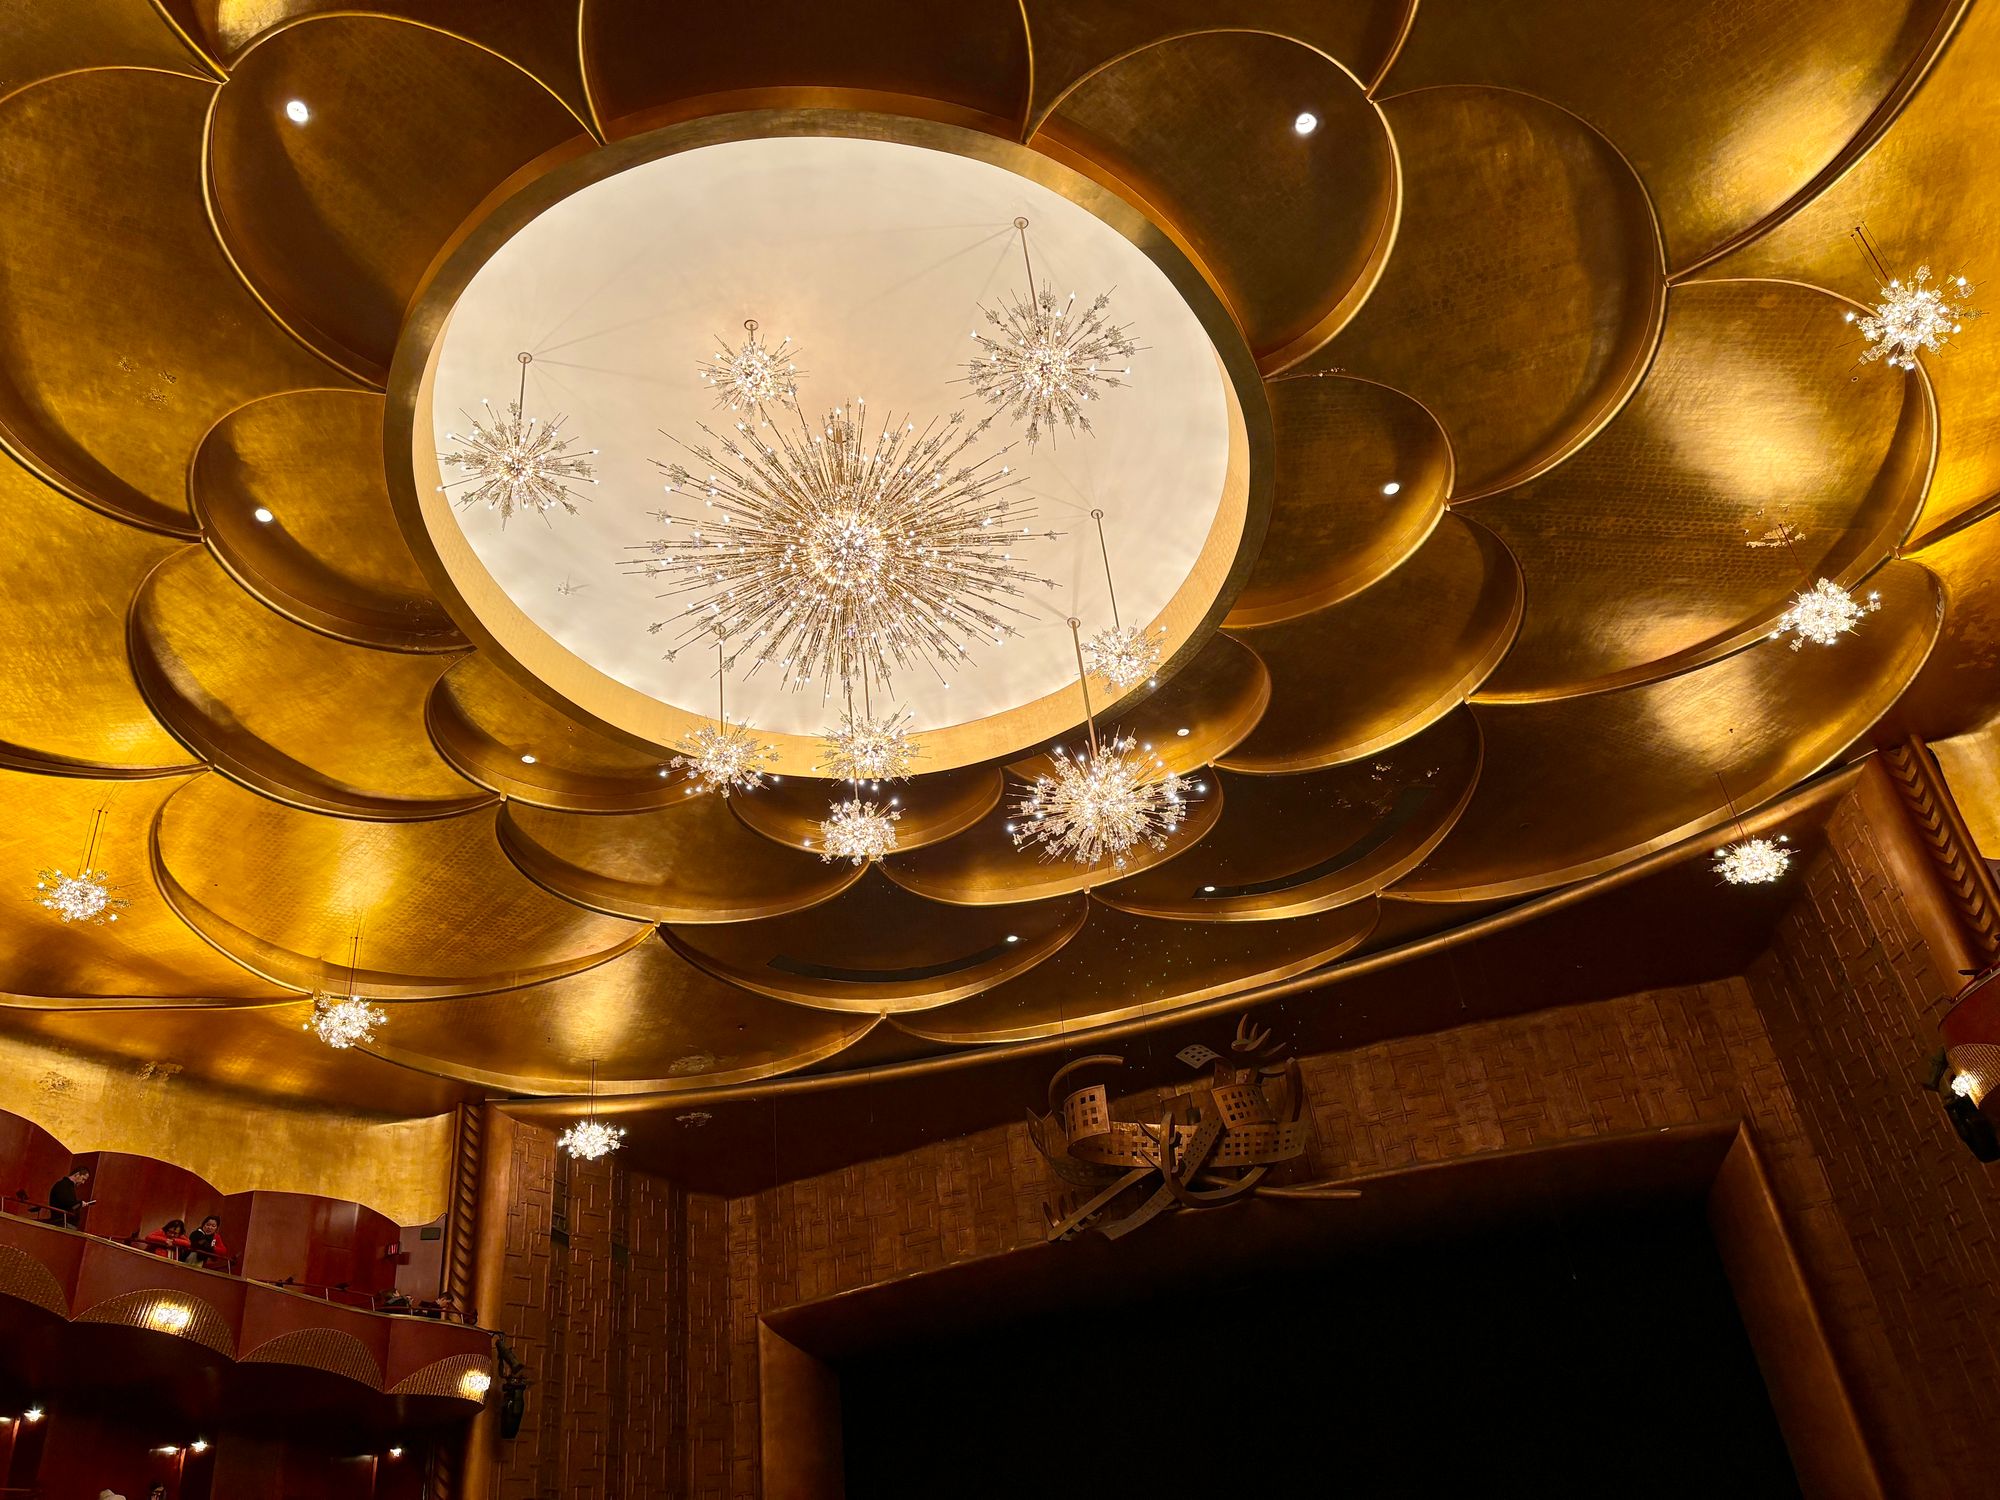 Ceiling of the Metropolitan Opera, set with layered gold circular panels and a bright center from which starburst chandeliers hang